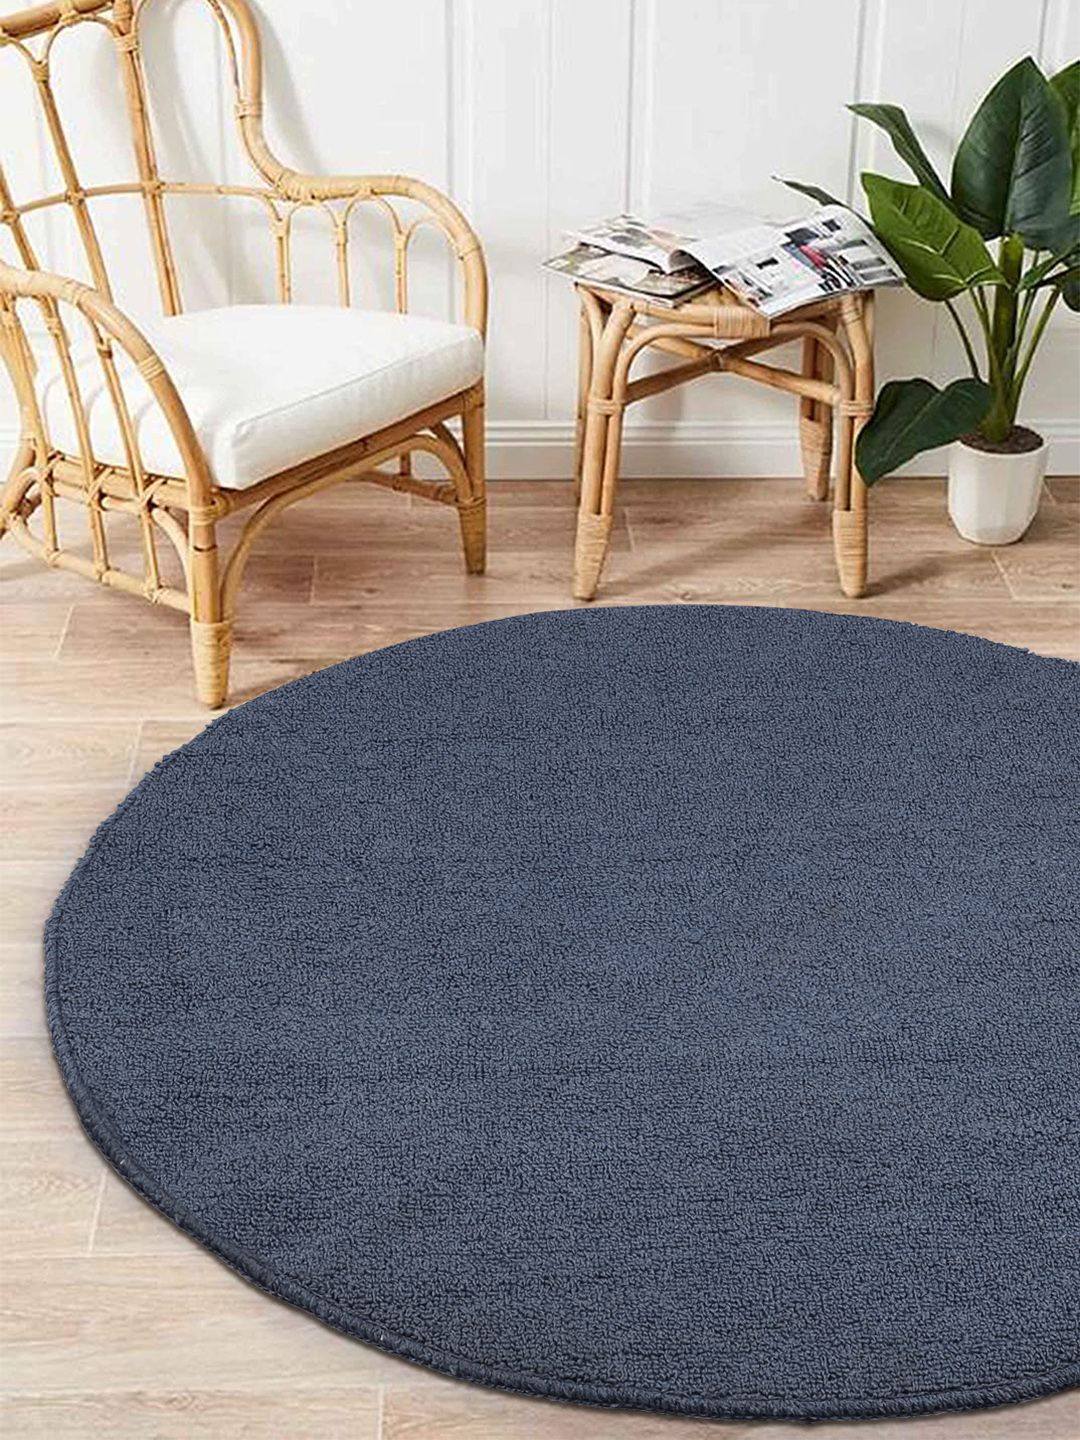 Saral Home Blue Solid PP-Yarn Round Anti-Skid Multi-Use Floor Mat Price in India